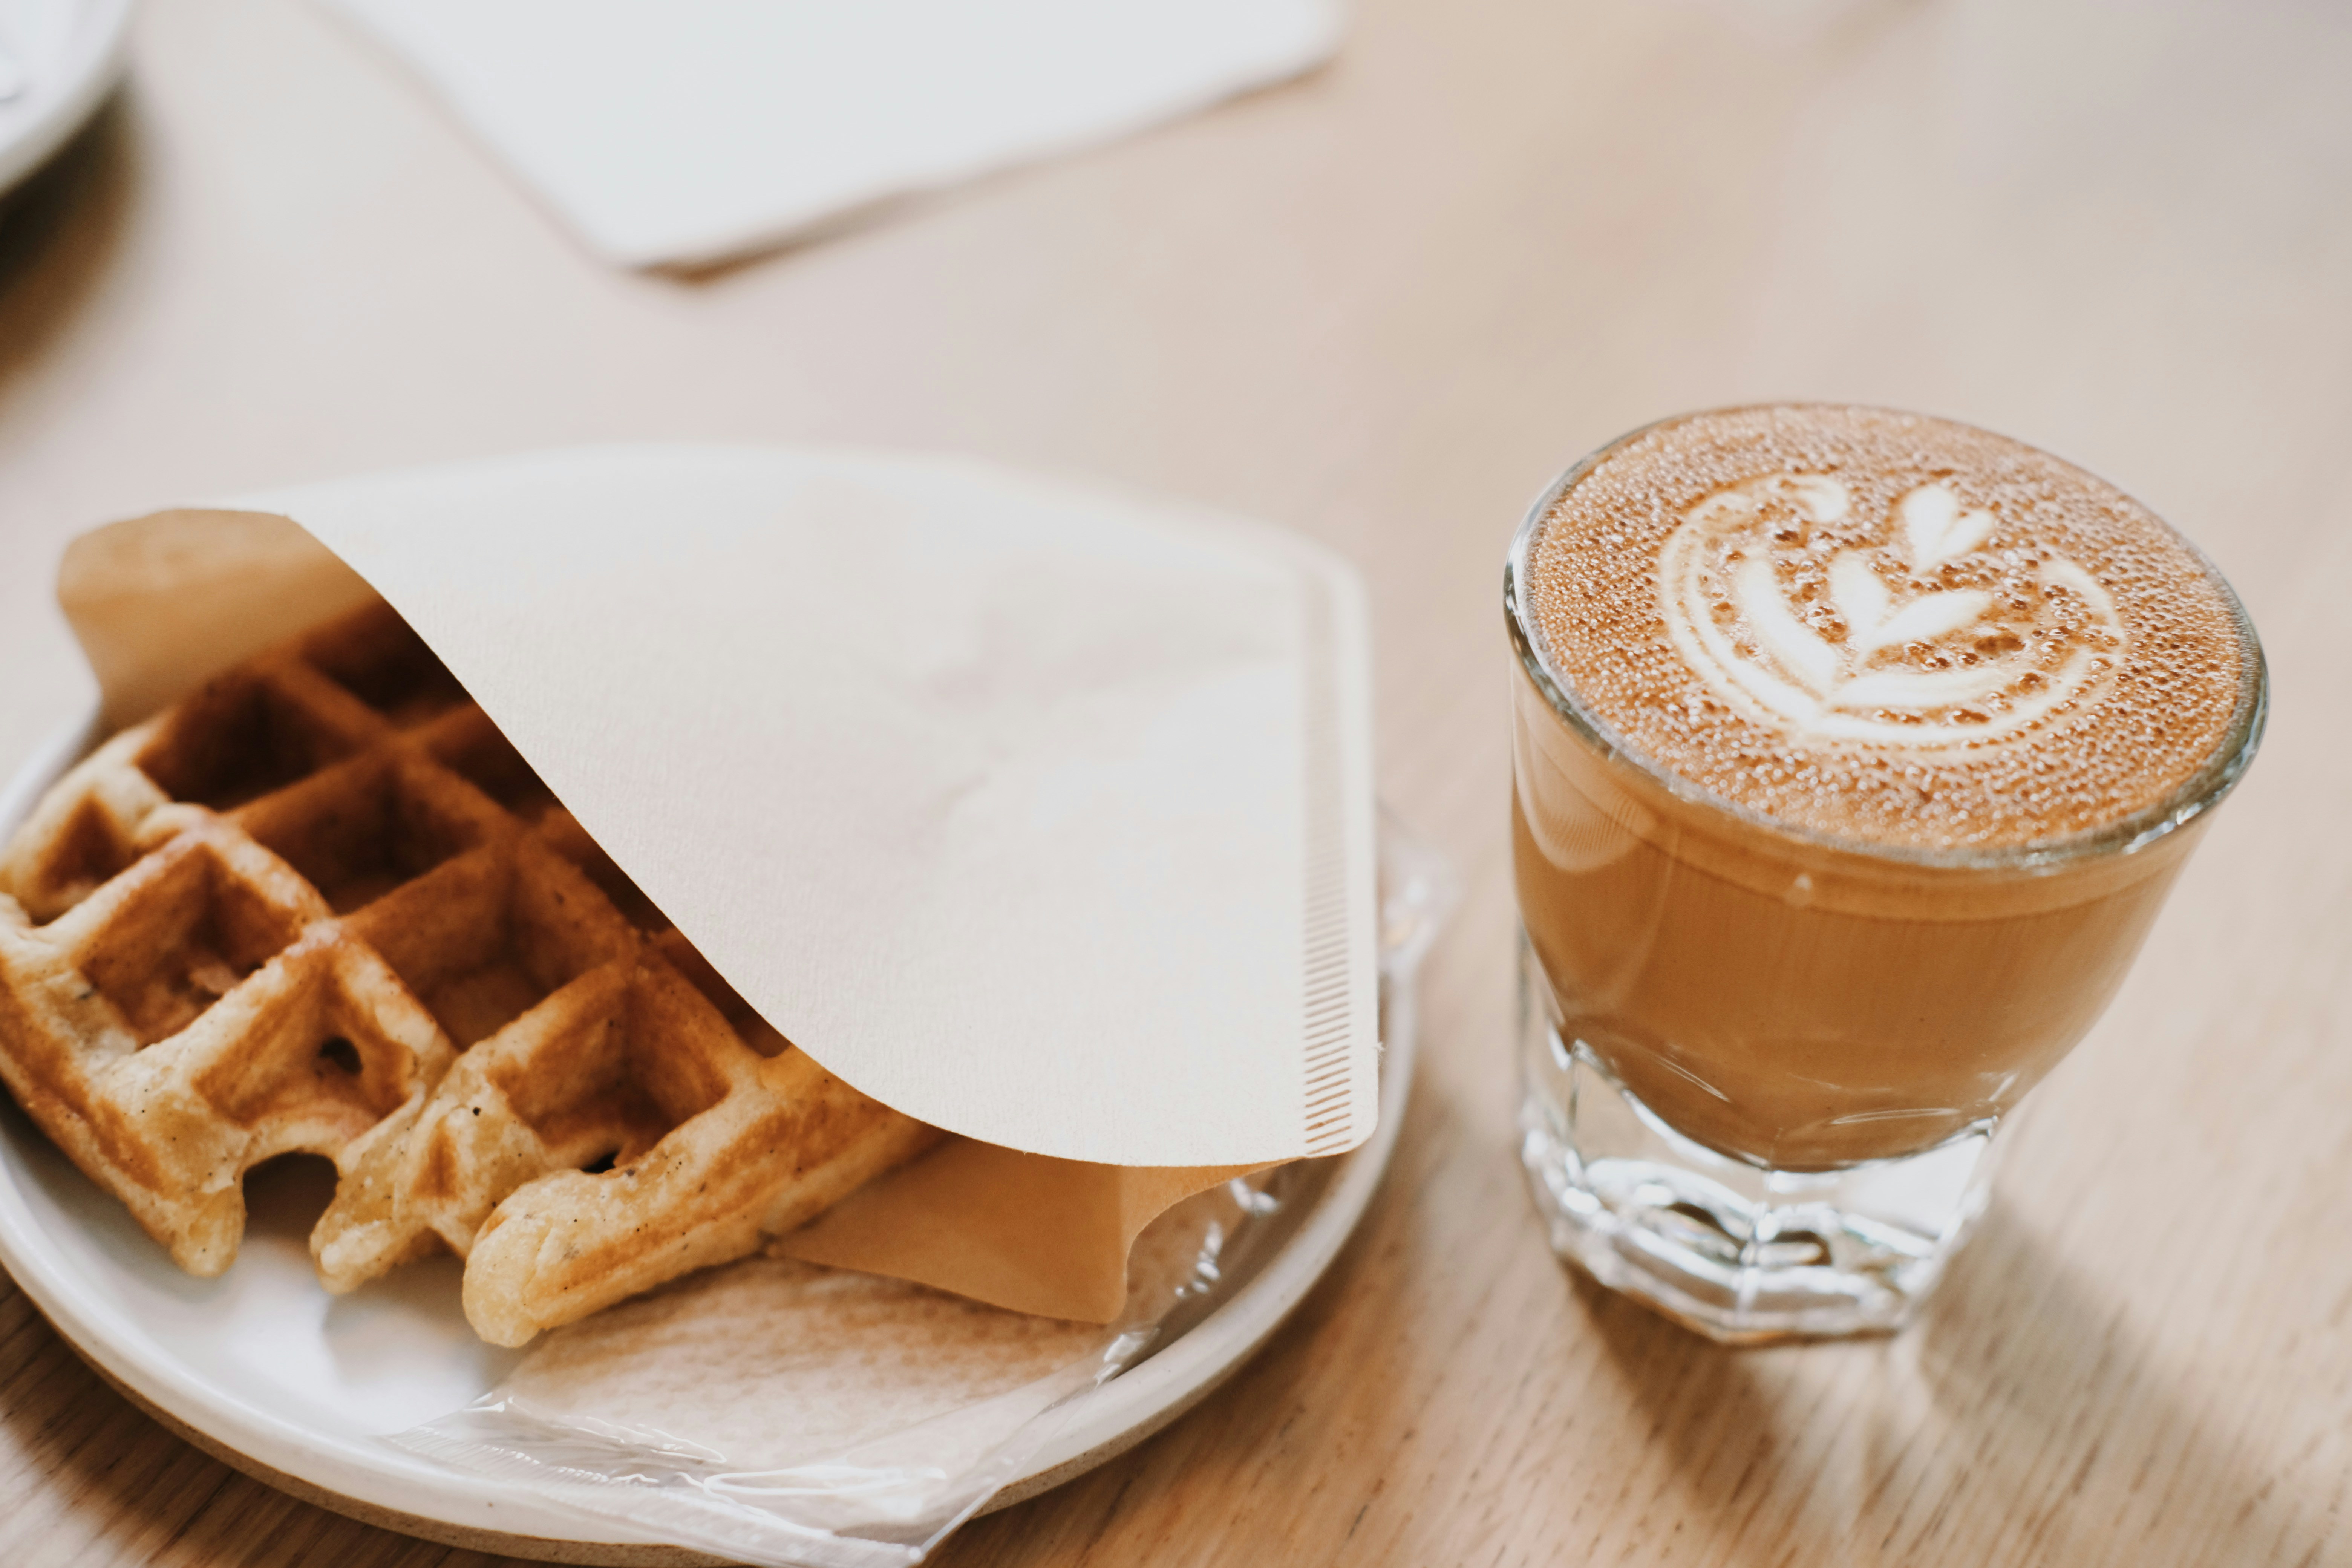 Choose from a curated selection of coffee photos. Always free on Unsplash.